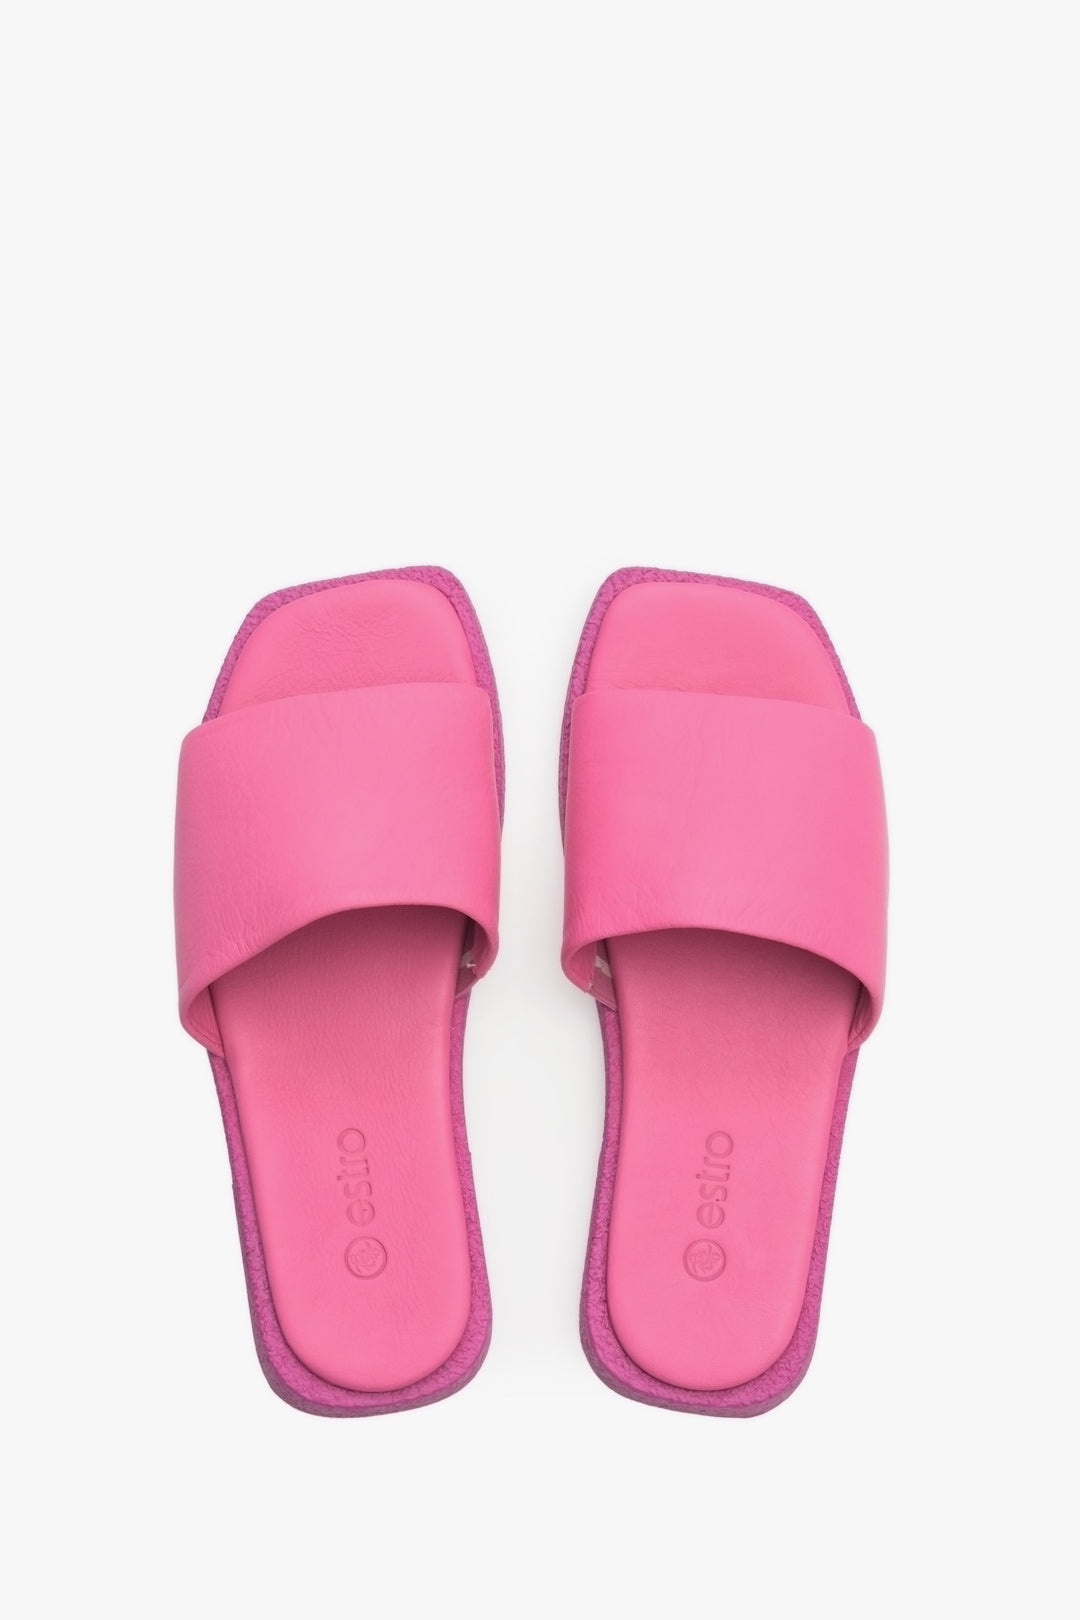 Leather, pink Estro women's flat sandals with a square toe - presentation of the model from above.